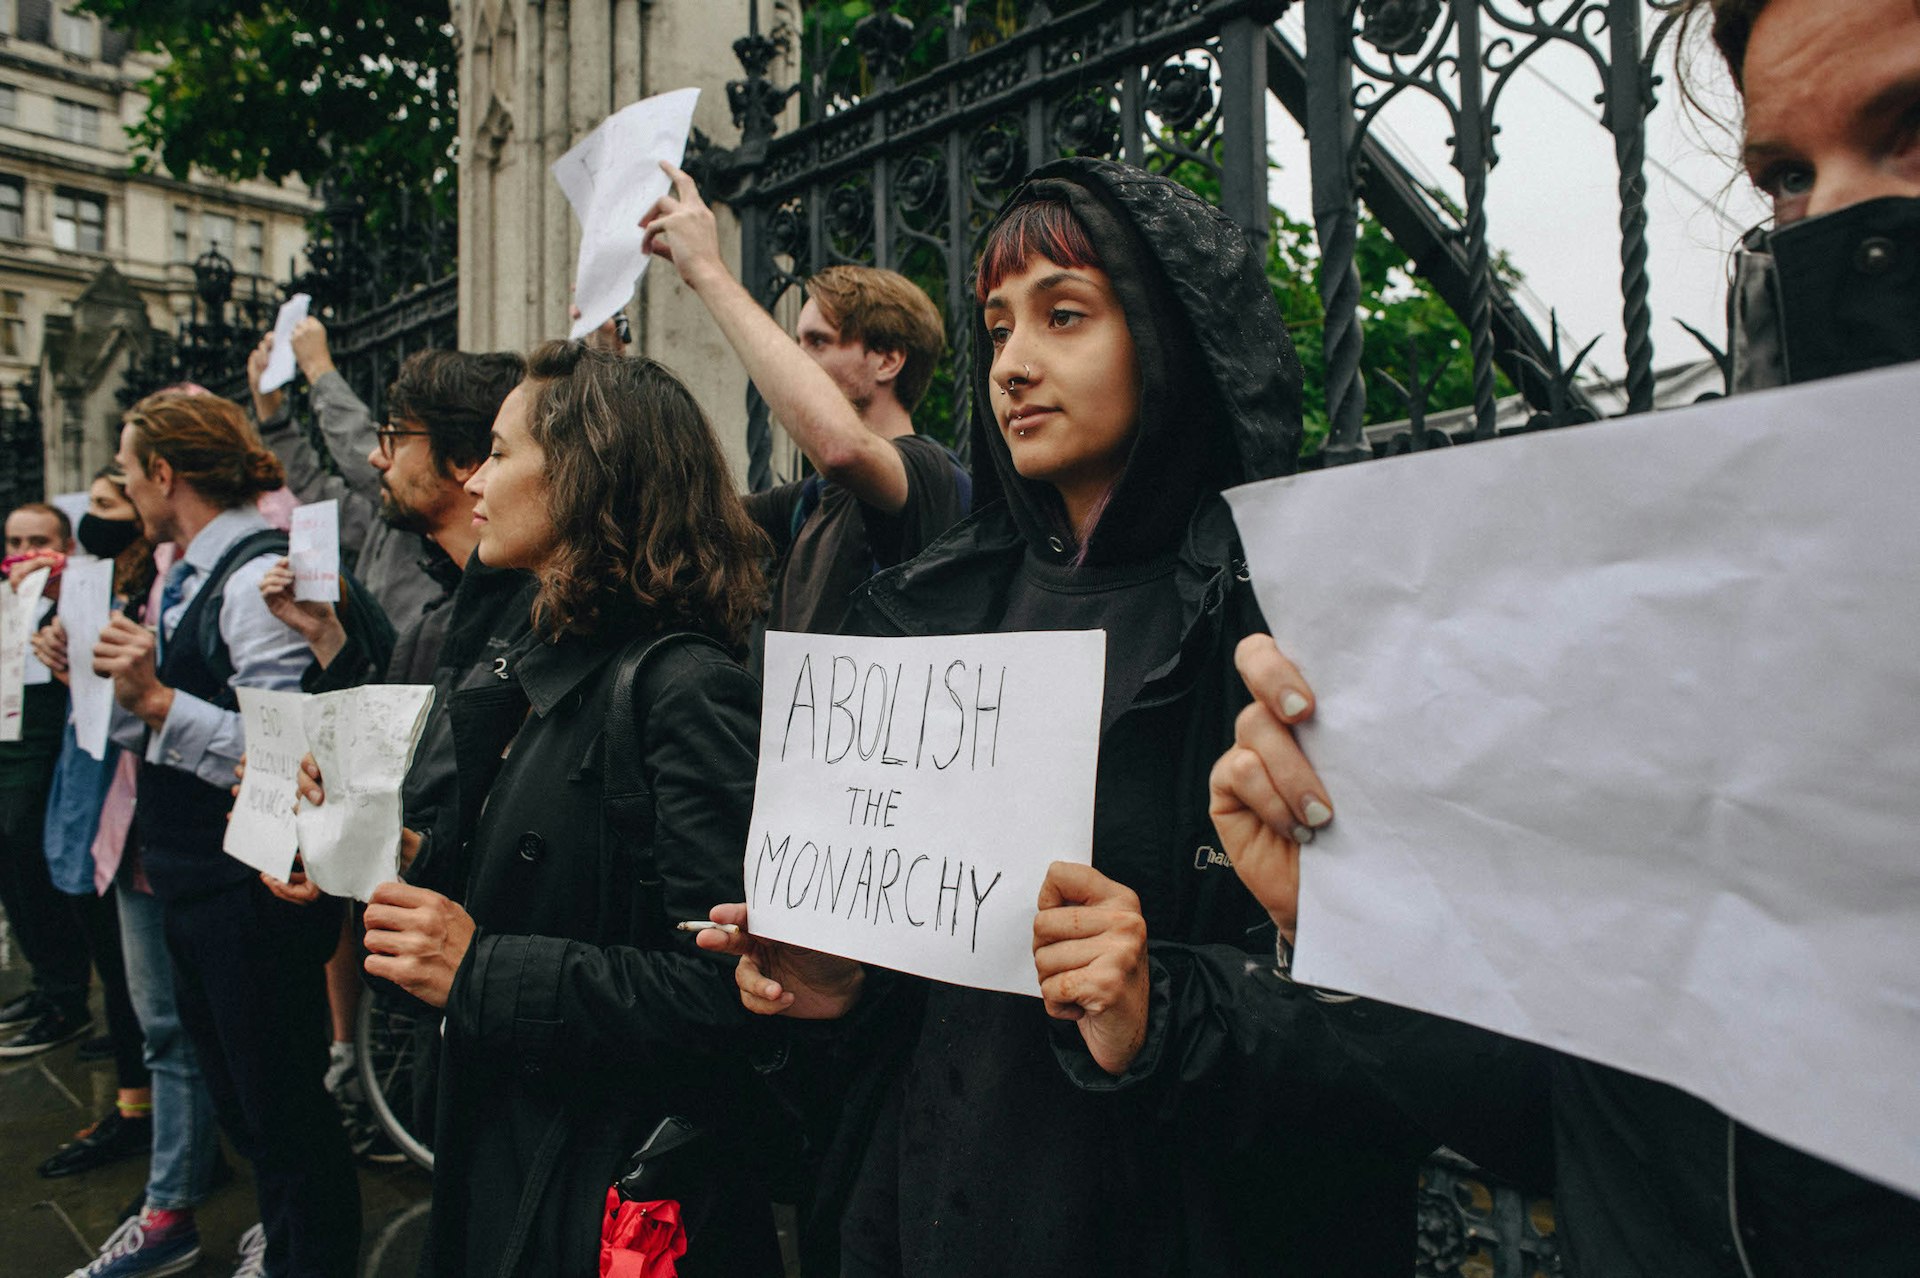 Photos of anti-monarchy protestors gathered in London